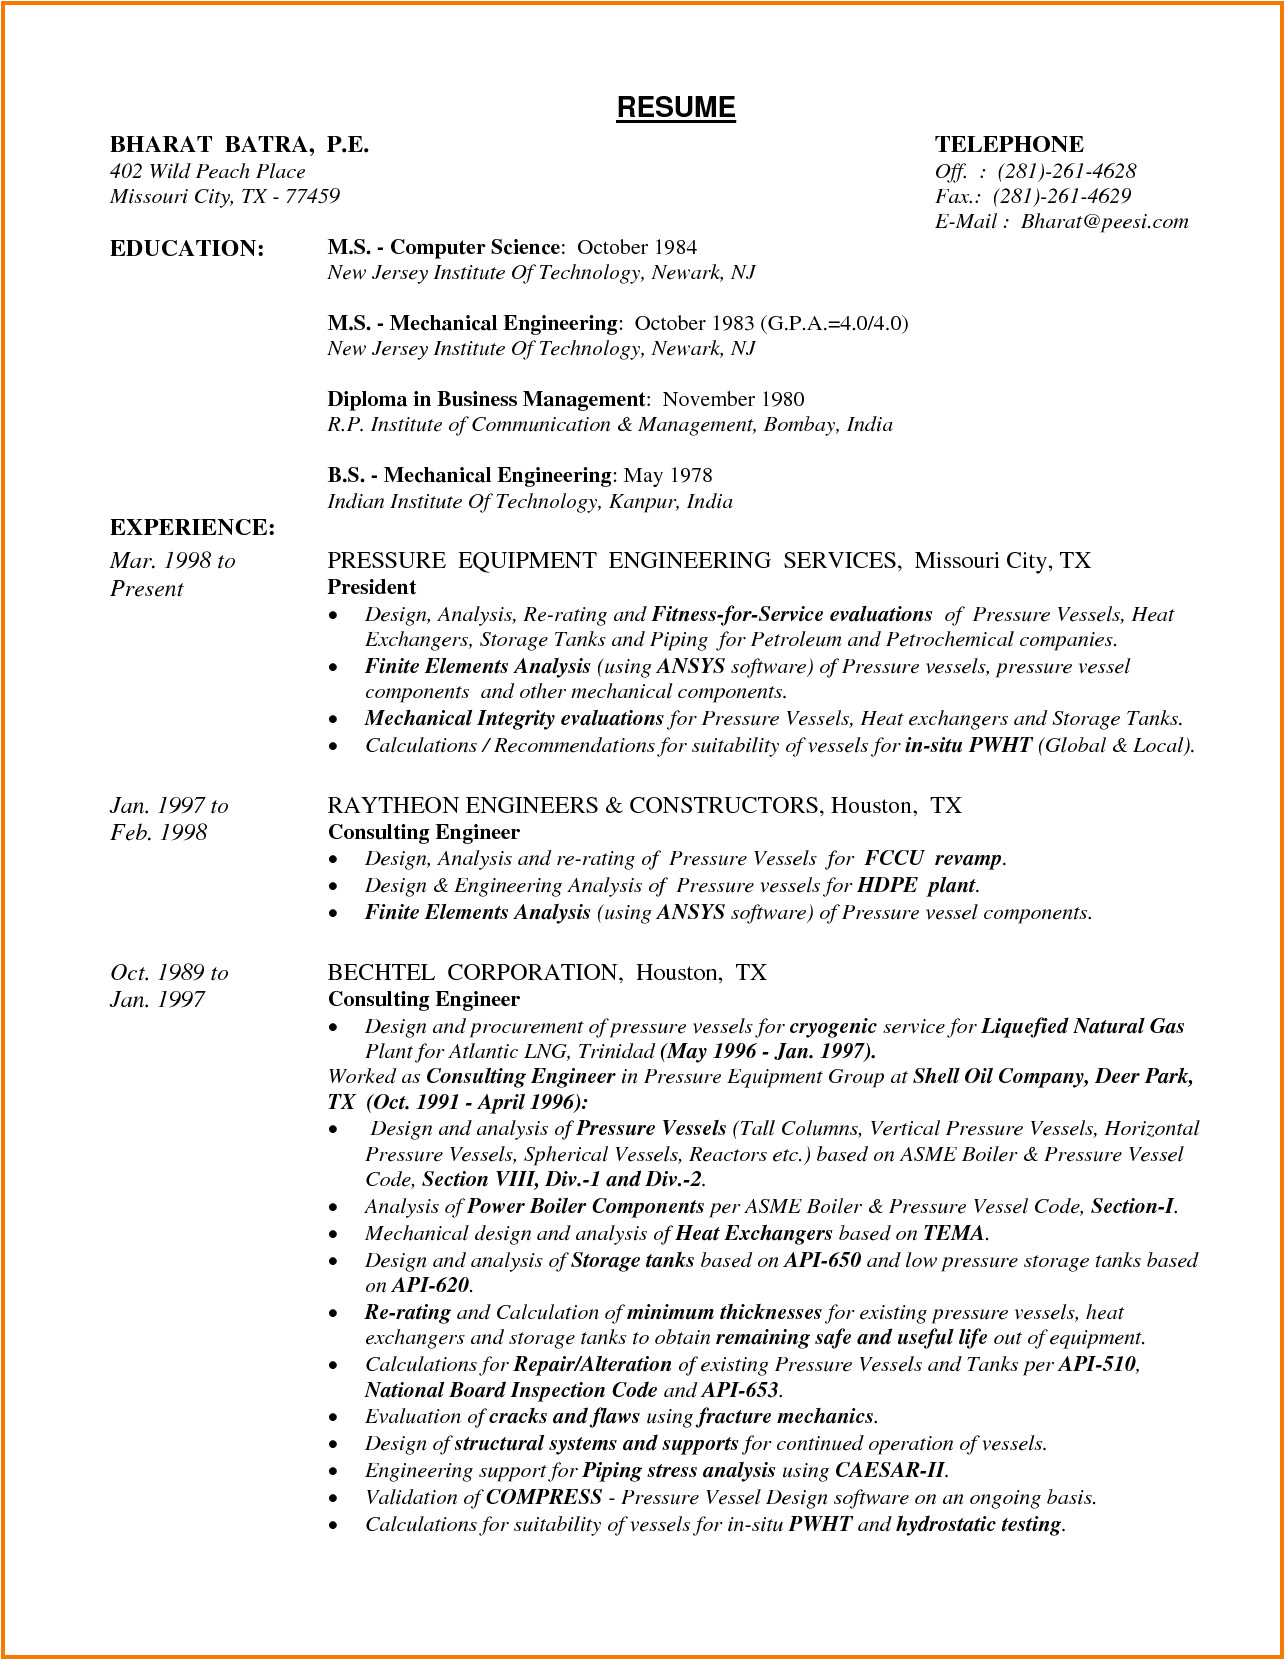 sample resume for service engineer